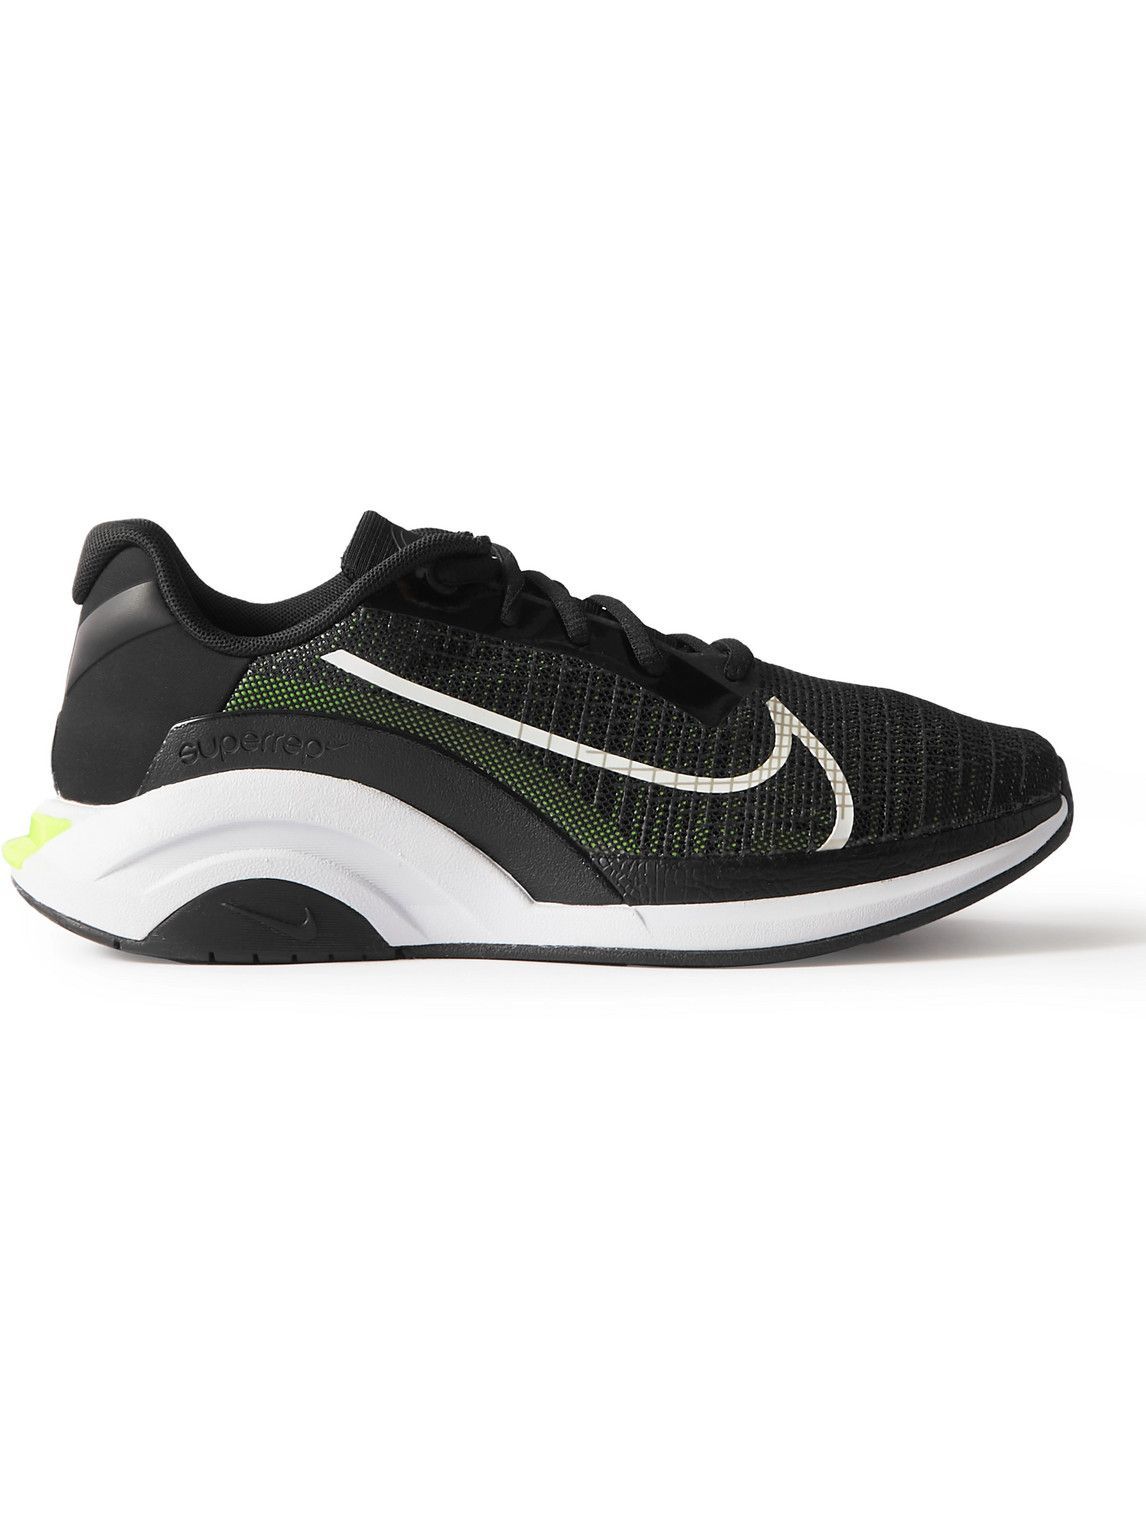 Nike Training - ZoomX SuperRep Surge Mesh and Rubber Sneakers